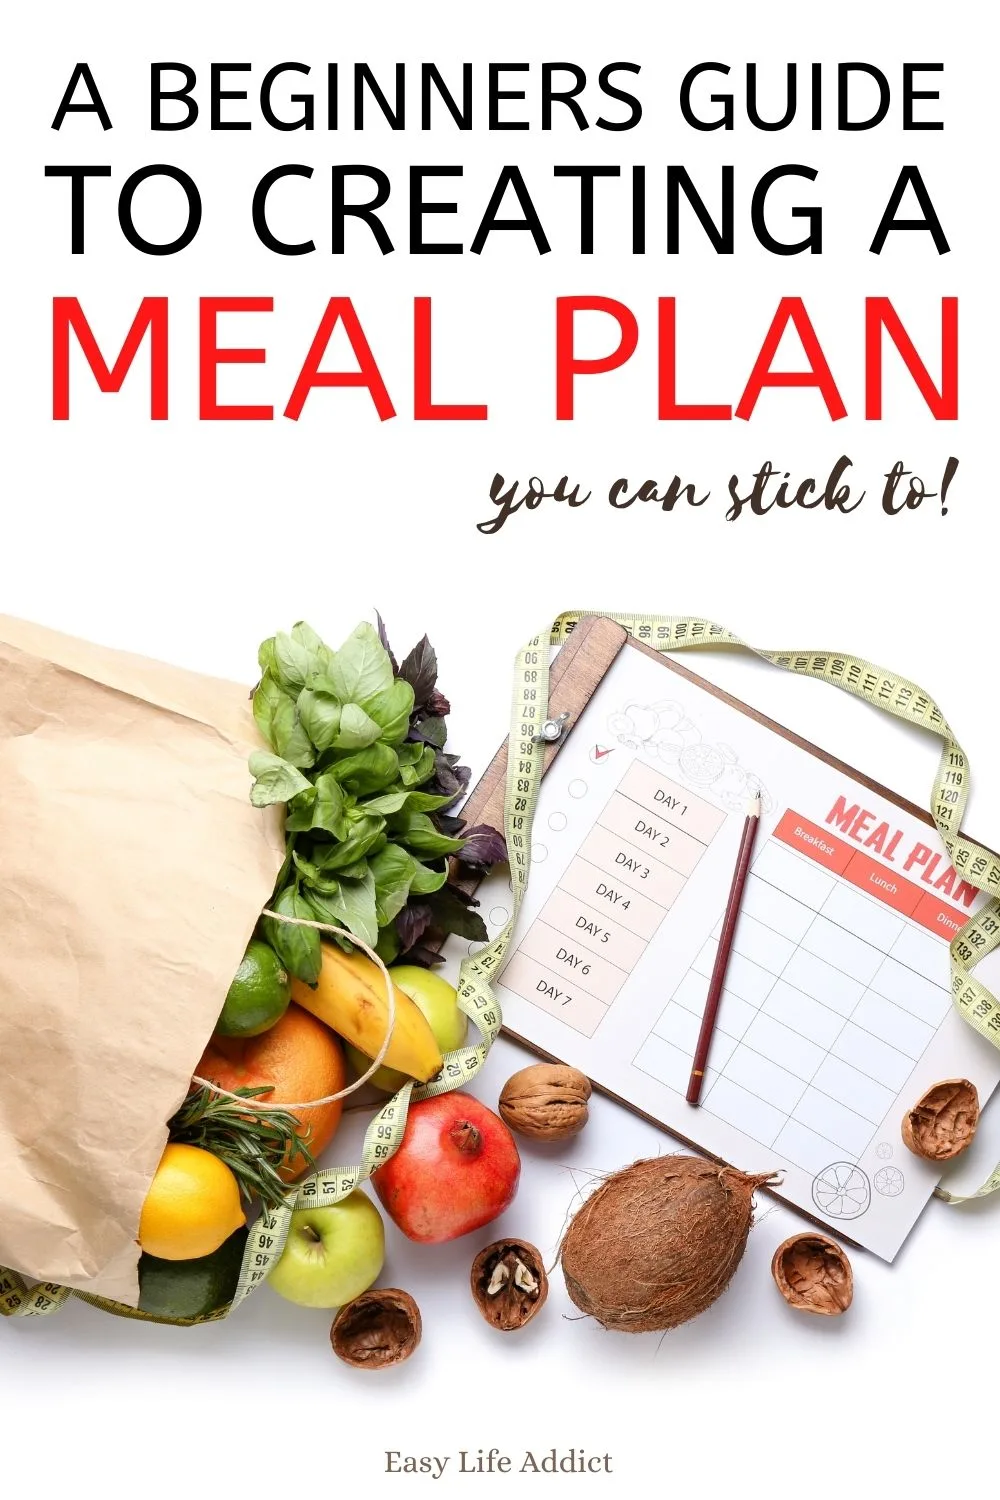 A complete guide to creating a meal plan for beginners